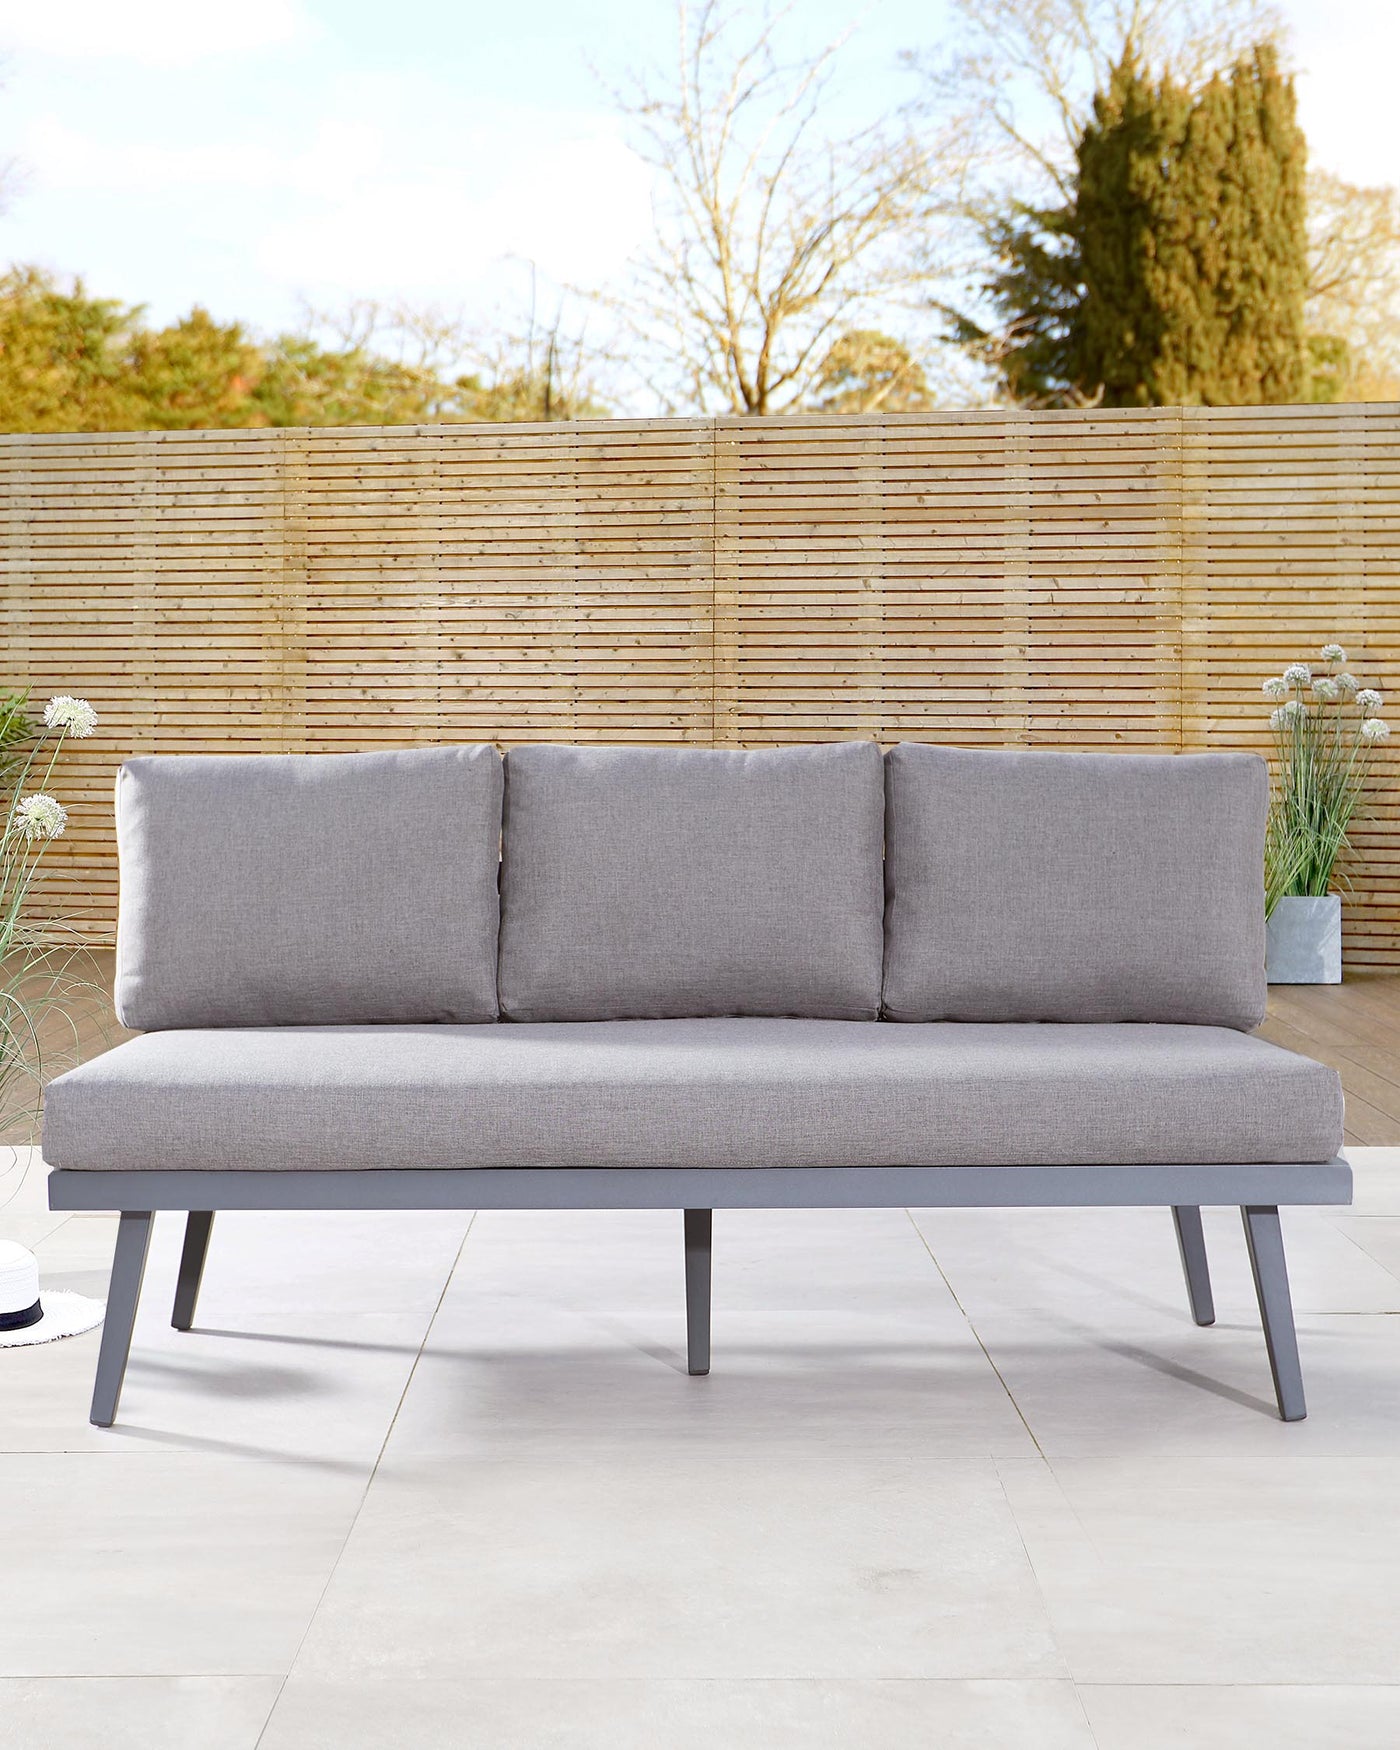 Palermo Grey 3 Seater Outdoor Bench with Backrest